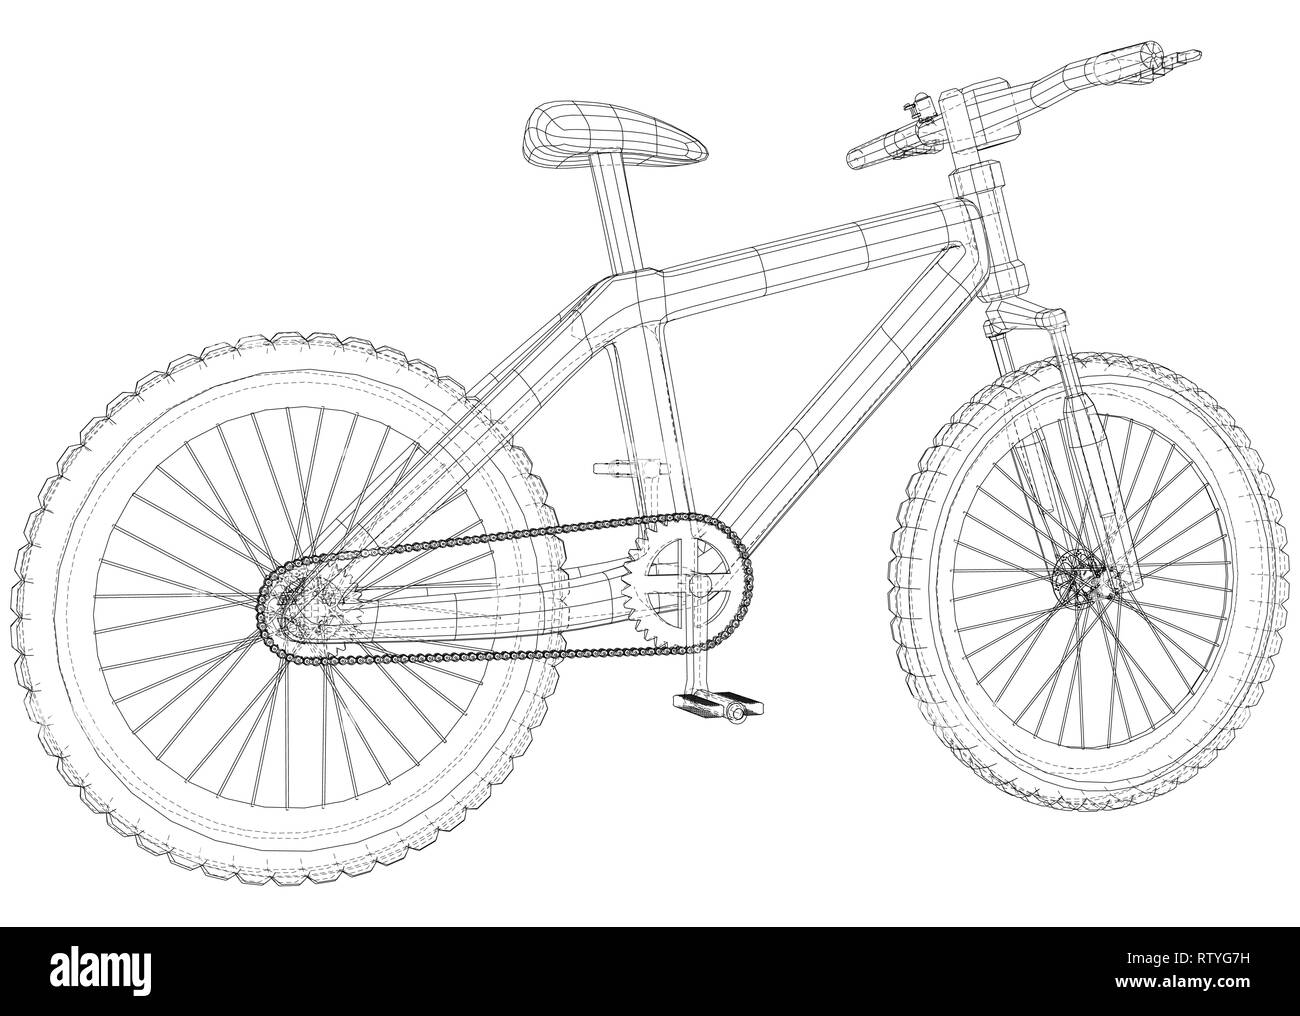 Bicycle blueprint. Outline bicycle on white background. Created illustration of 3d. Stock Vector